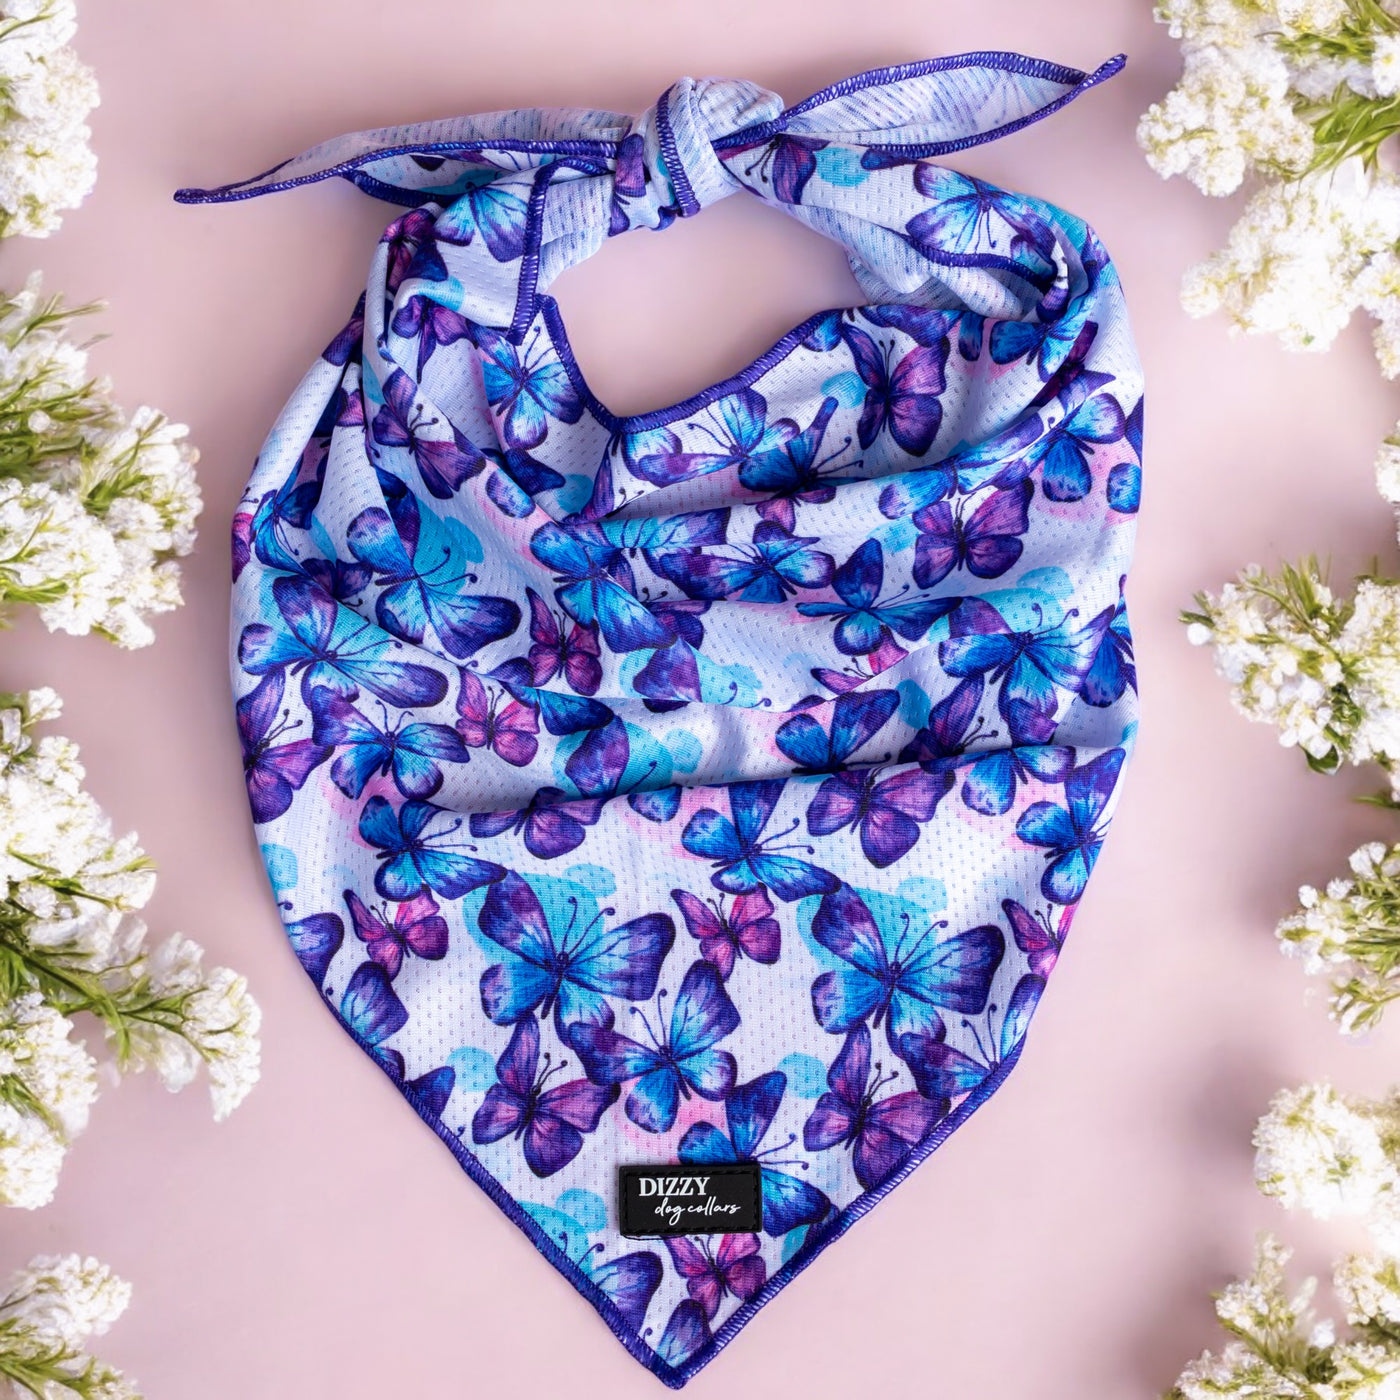 Butterfly Bandana  Description: A charming dog bandana featuring a vibrant pattern of blue and purple butterflies on a light background. The edges are neatly stitched in a matching blue thread.